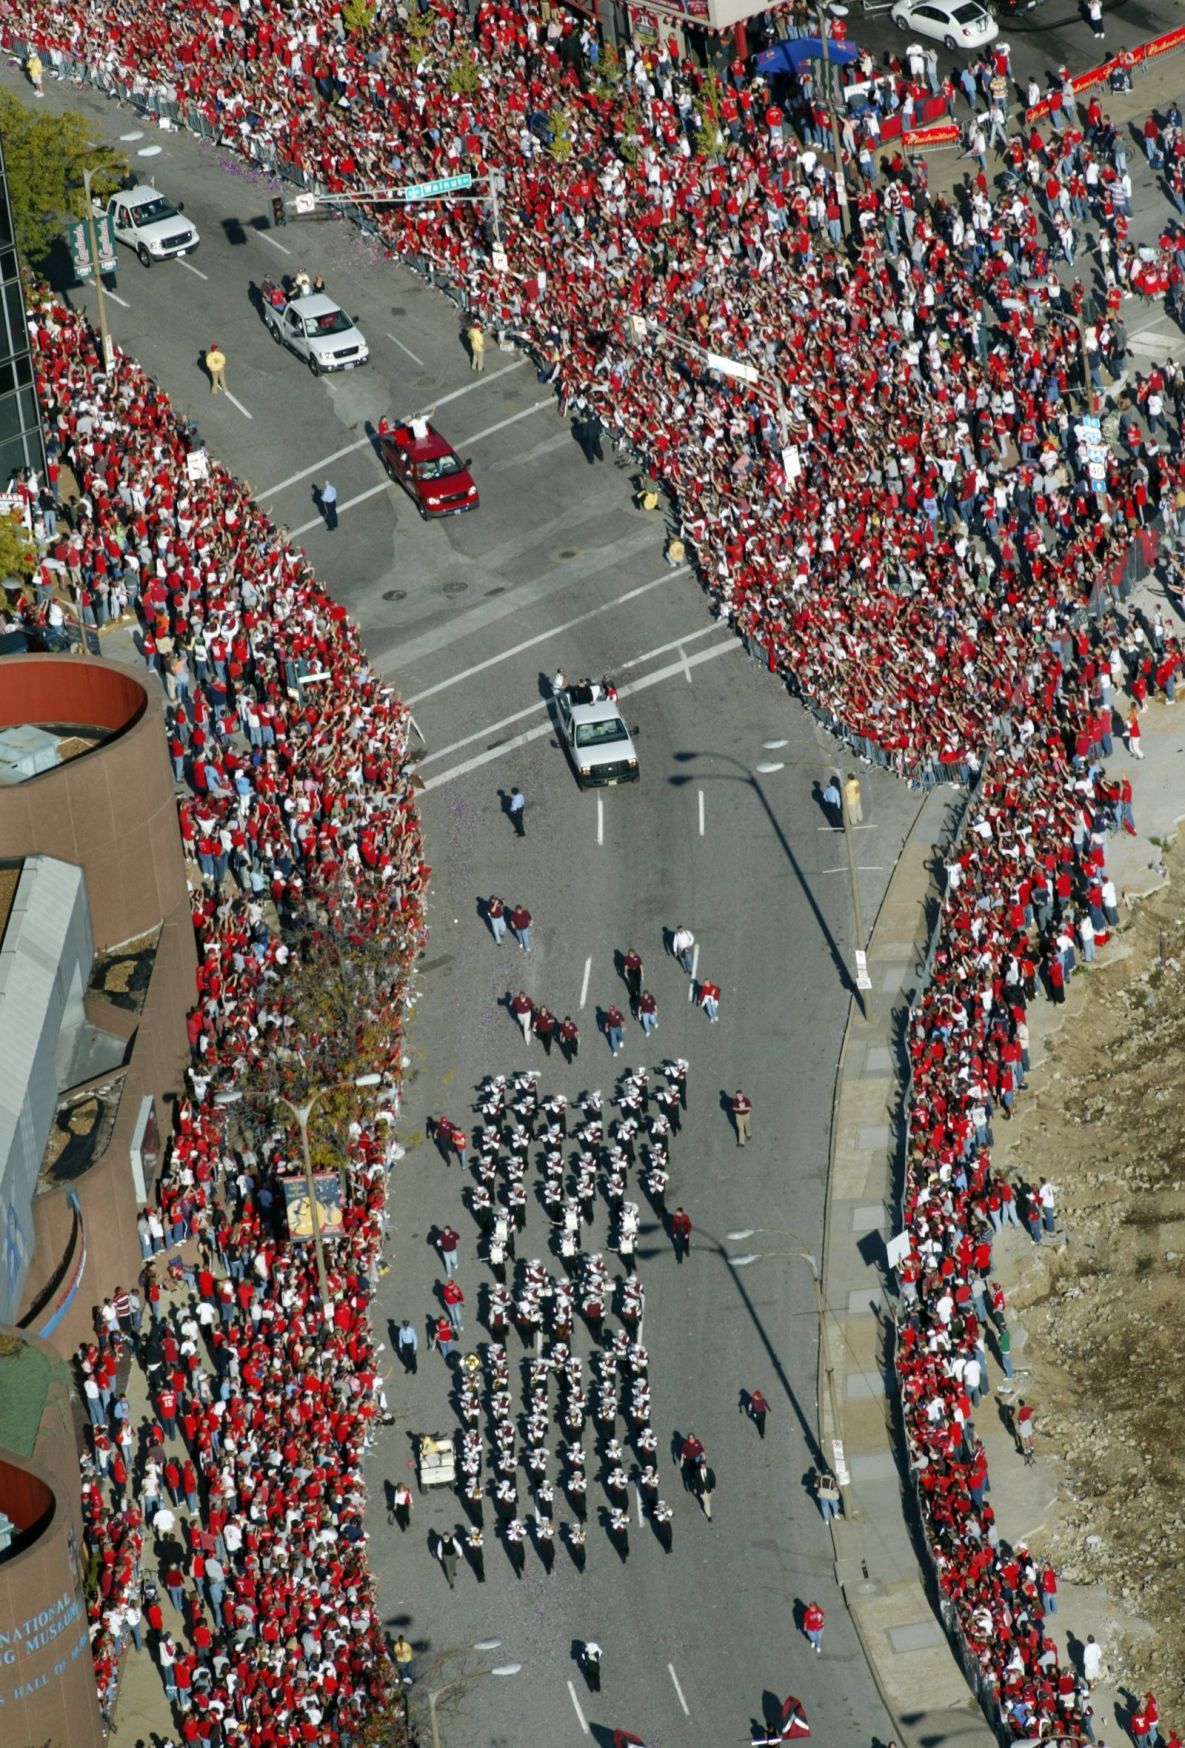 St. Louis Cardinals World Series Parade and Celebration #stlcards